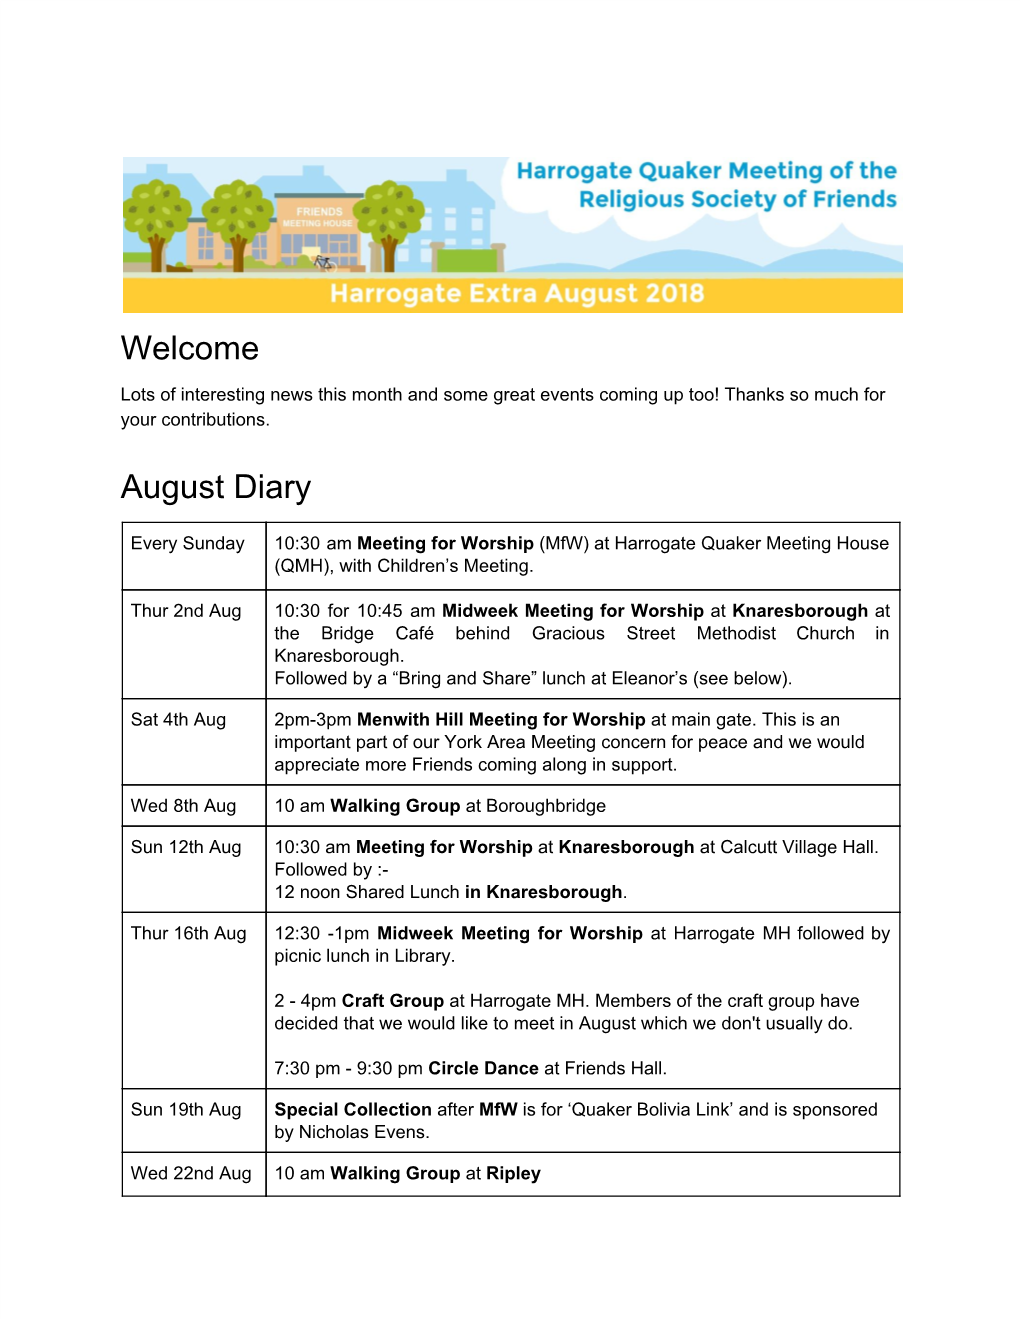 August Diary